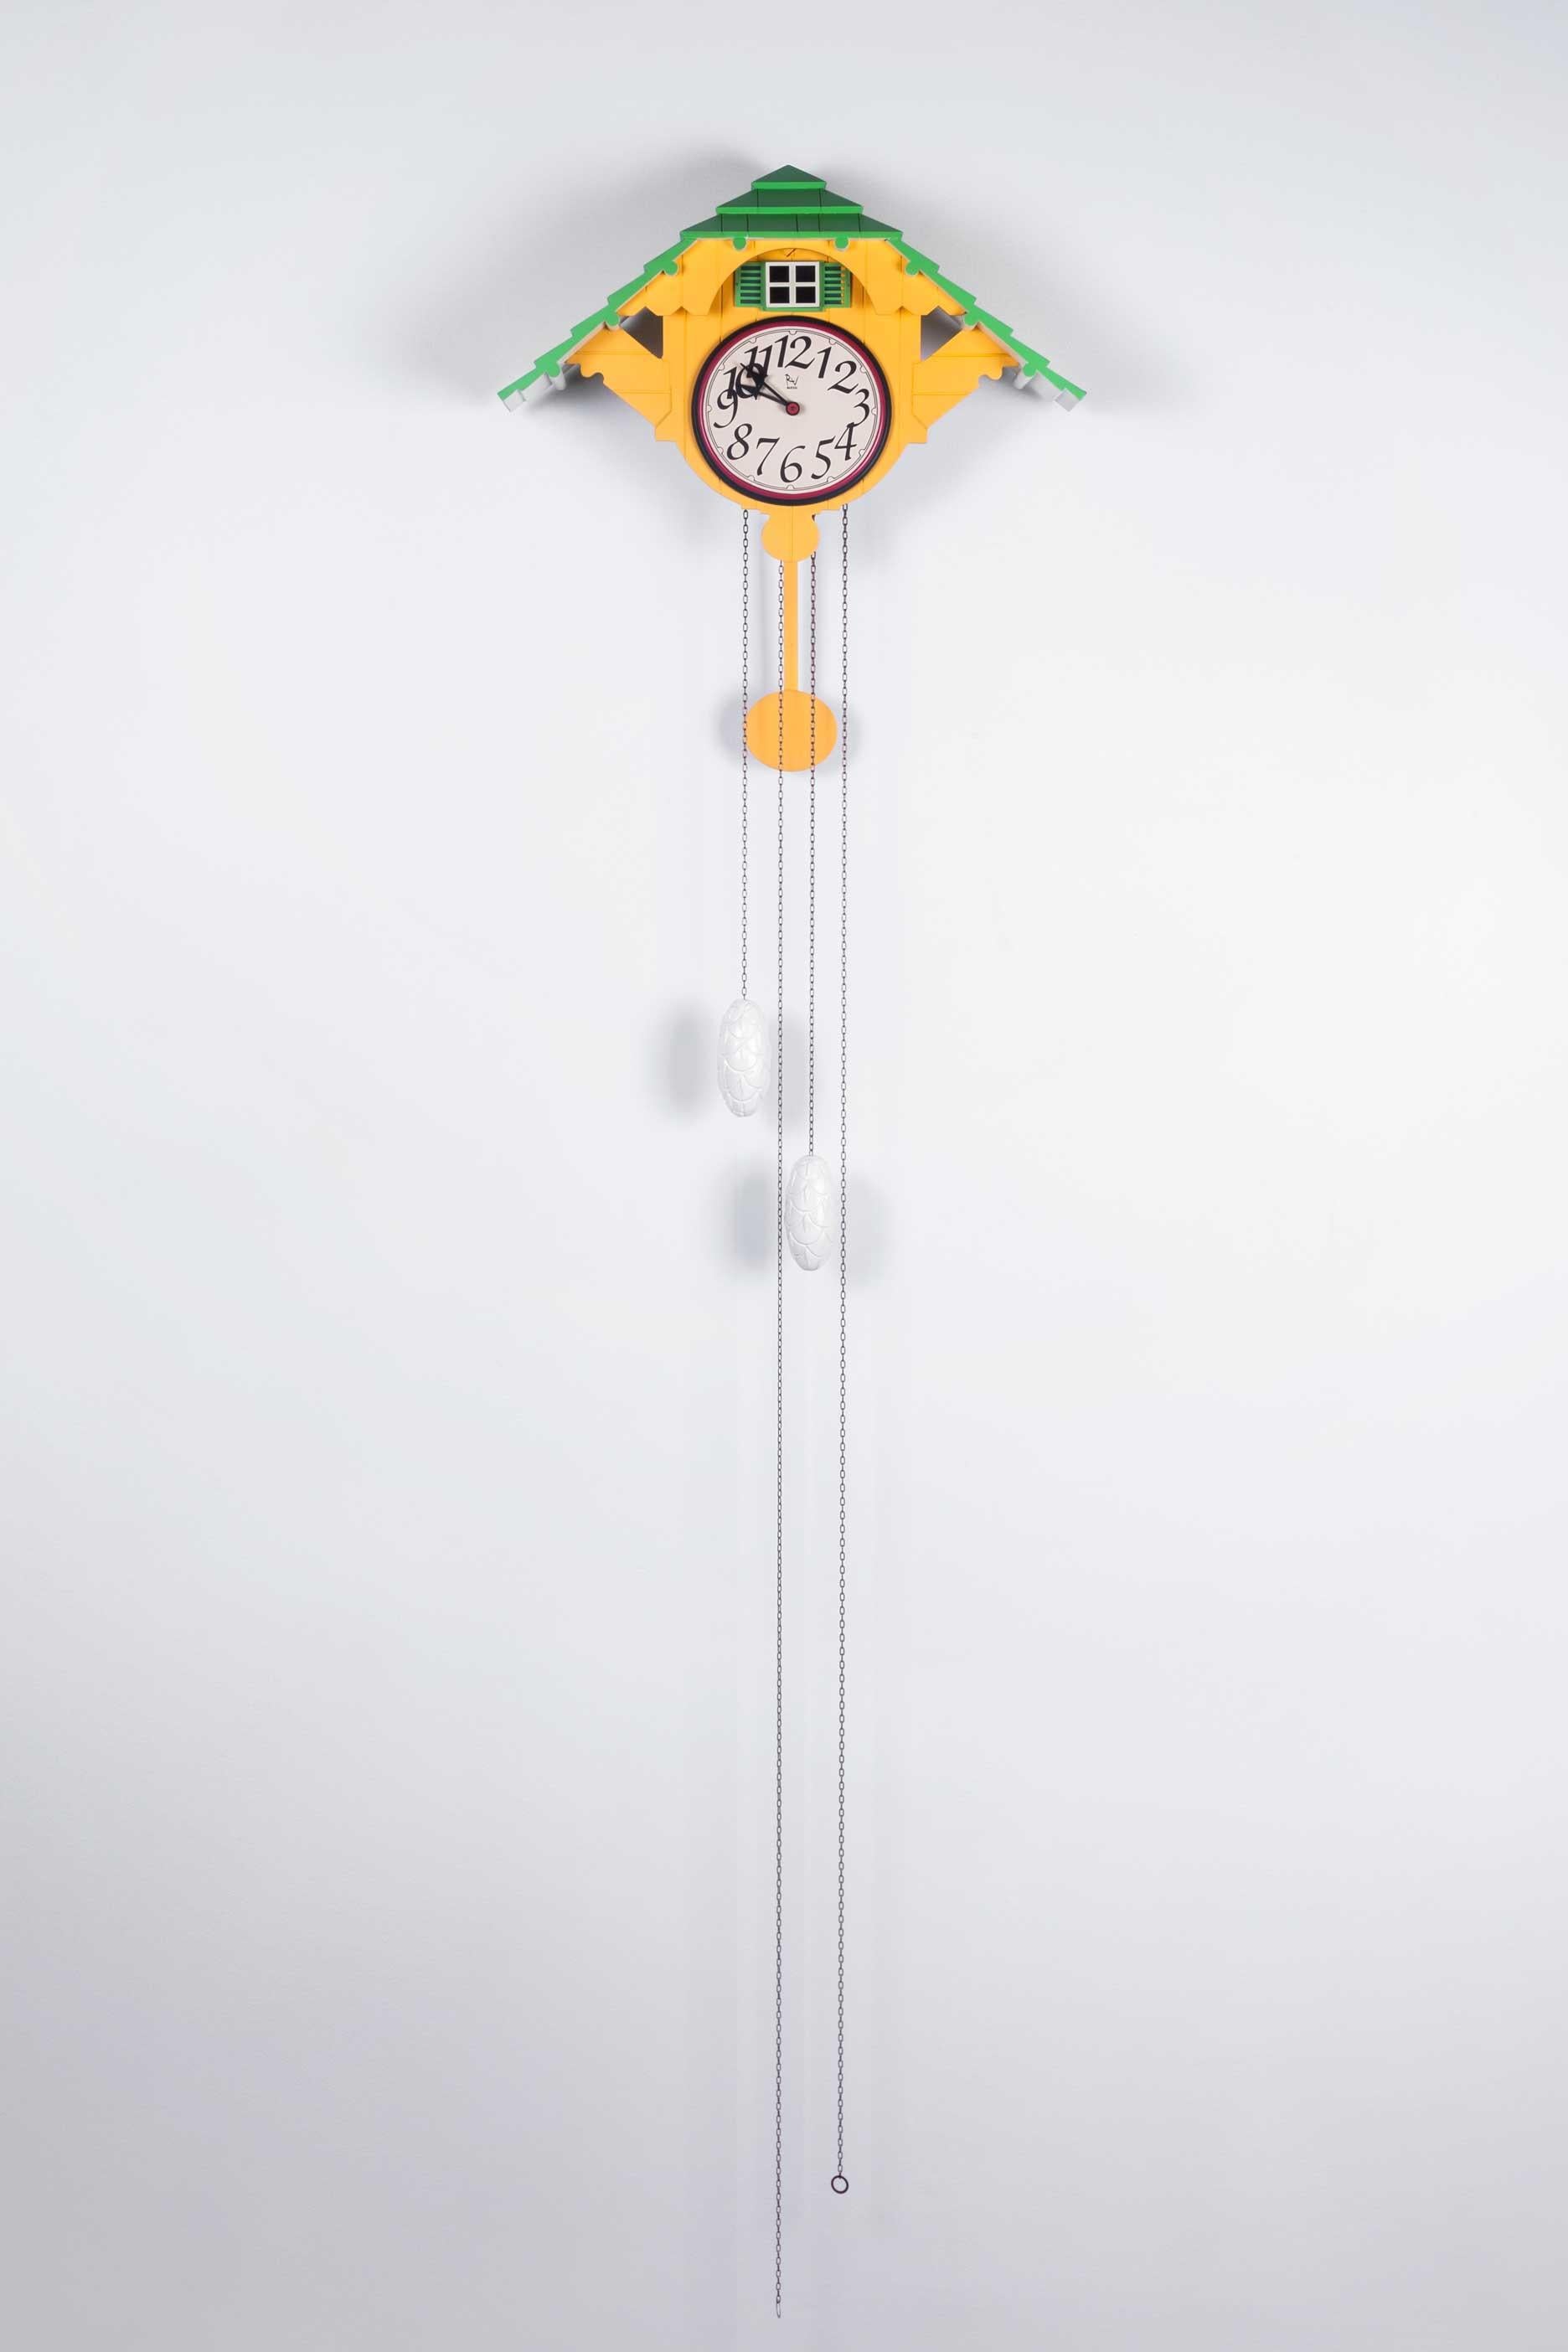 Brilliant yellow and green colors that pop in this postmodern cuckoo clock by Robert Venturi for Alesia, made in Italy in 1988.

A bellows operated cuckoo melody plays at the turn of every hour, a little door opening to reveal a minimal steel